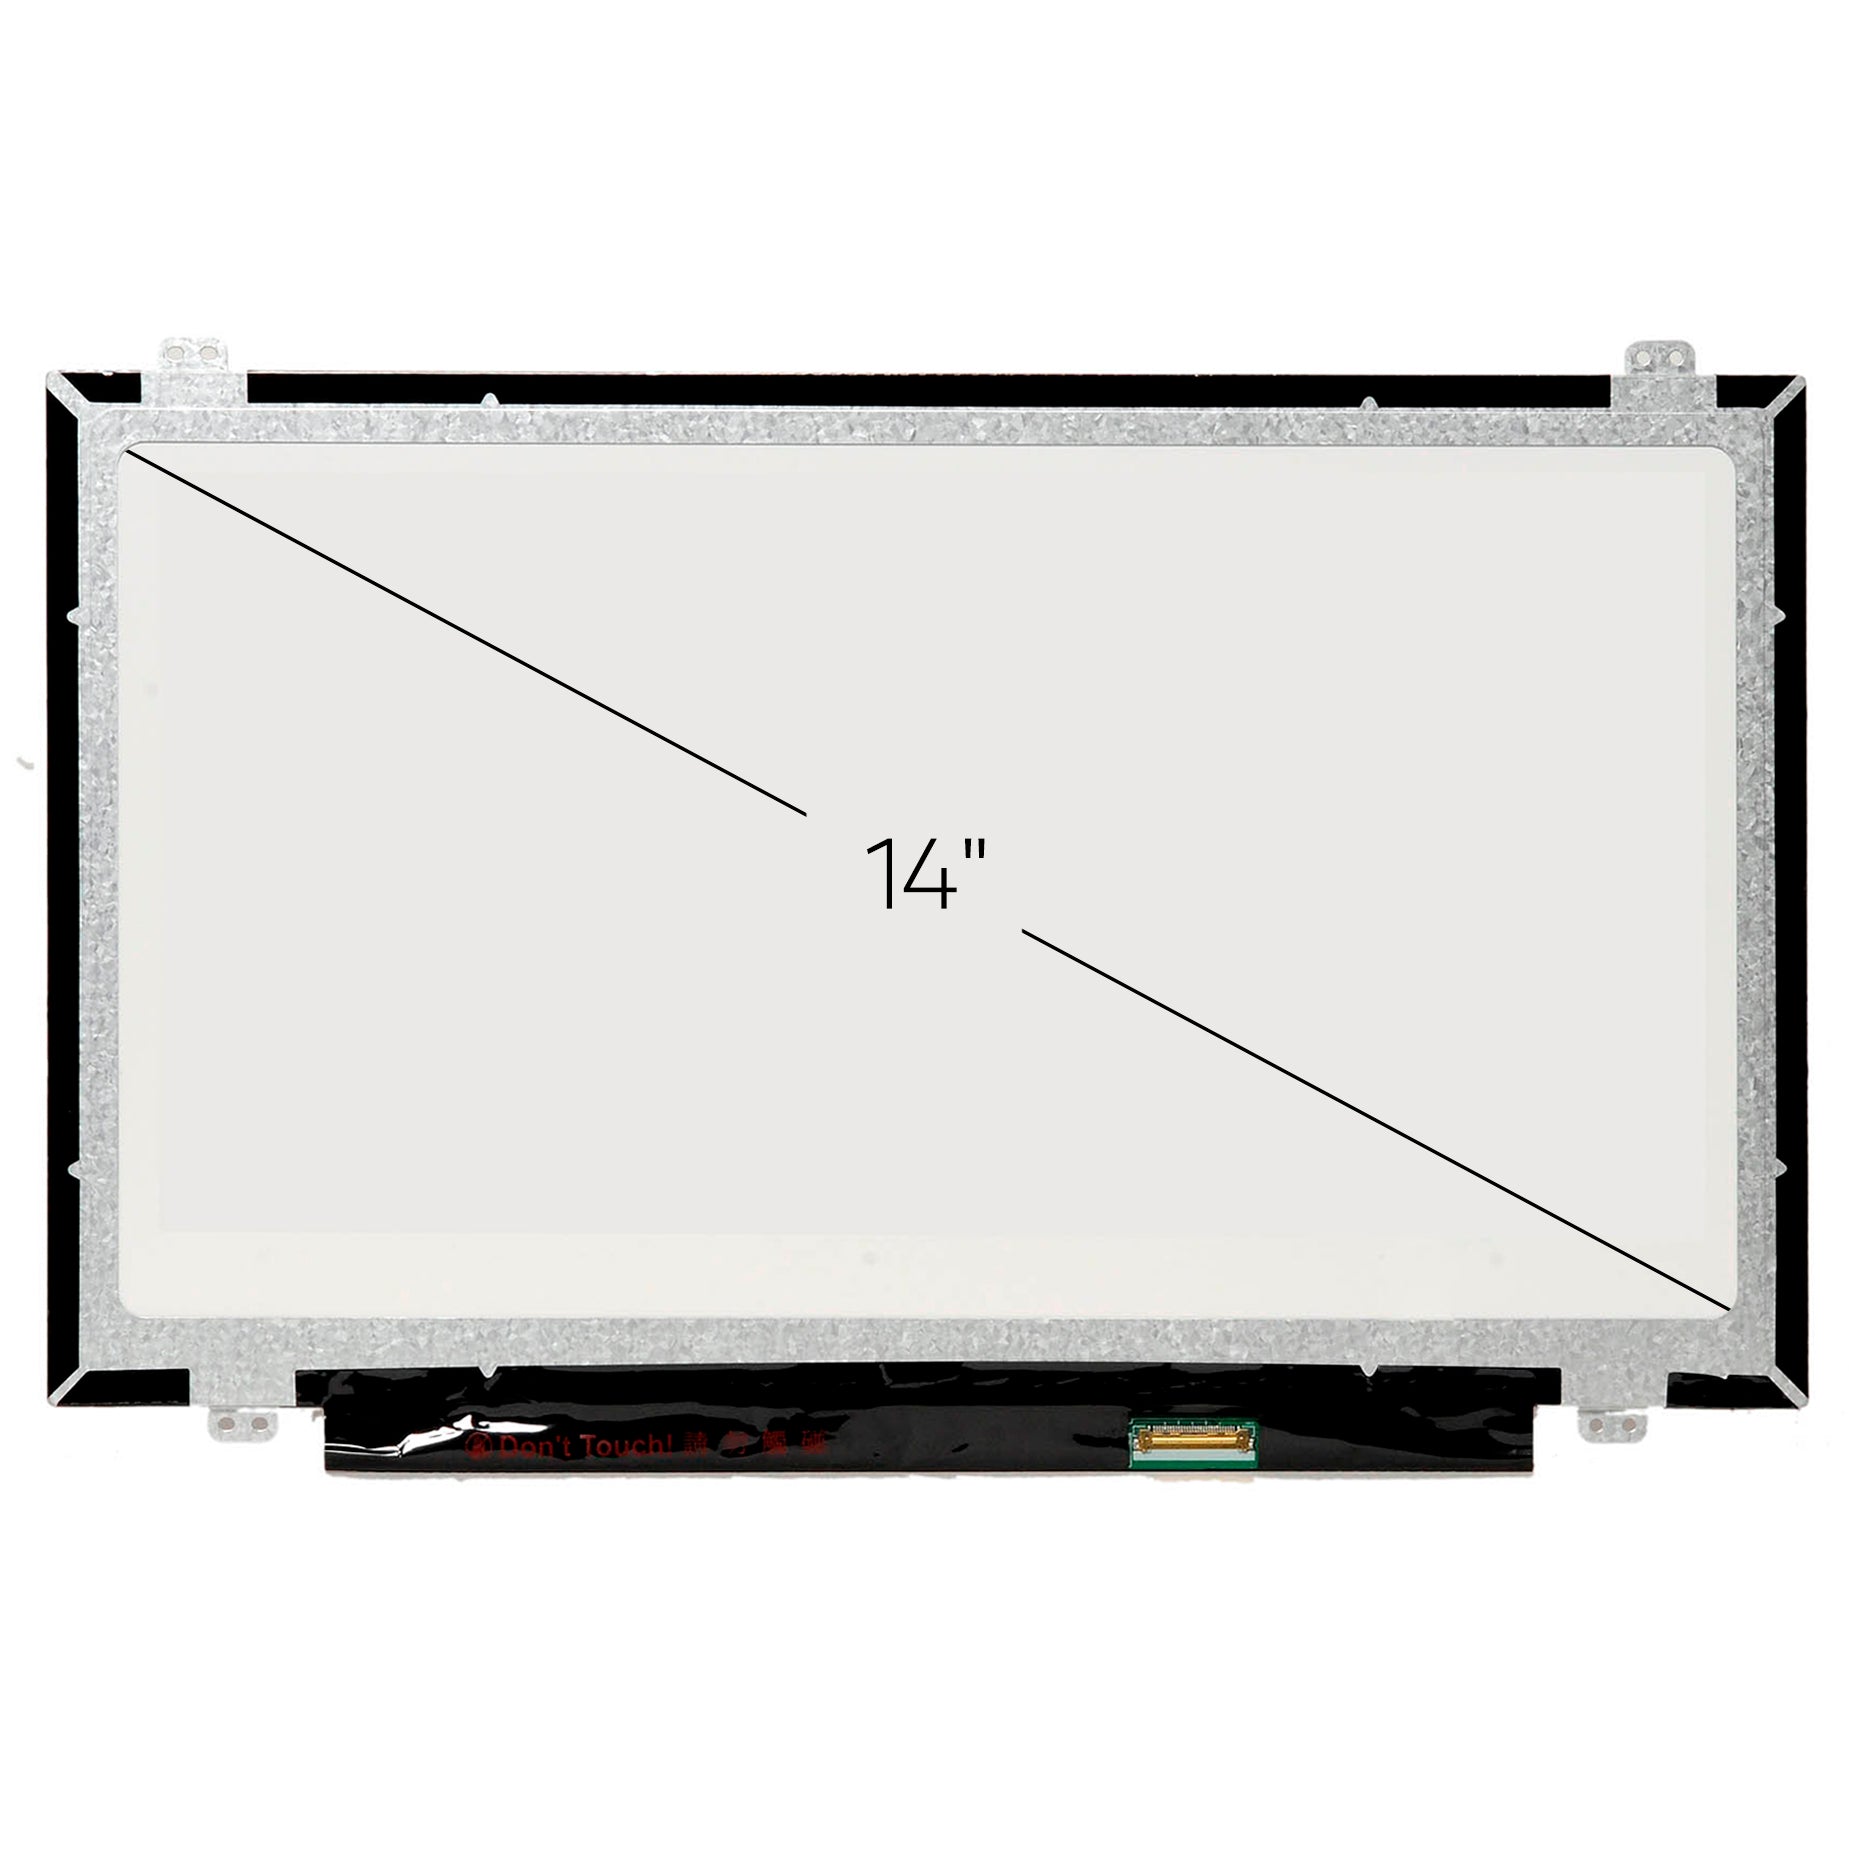 Screen Replacement for Lenovo Thinkpad L450 HD 1366x768 Glossy LCD LED Display